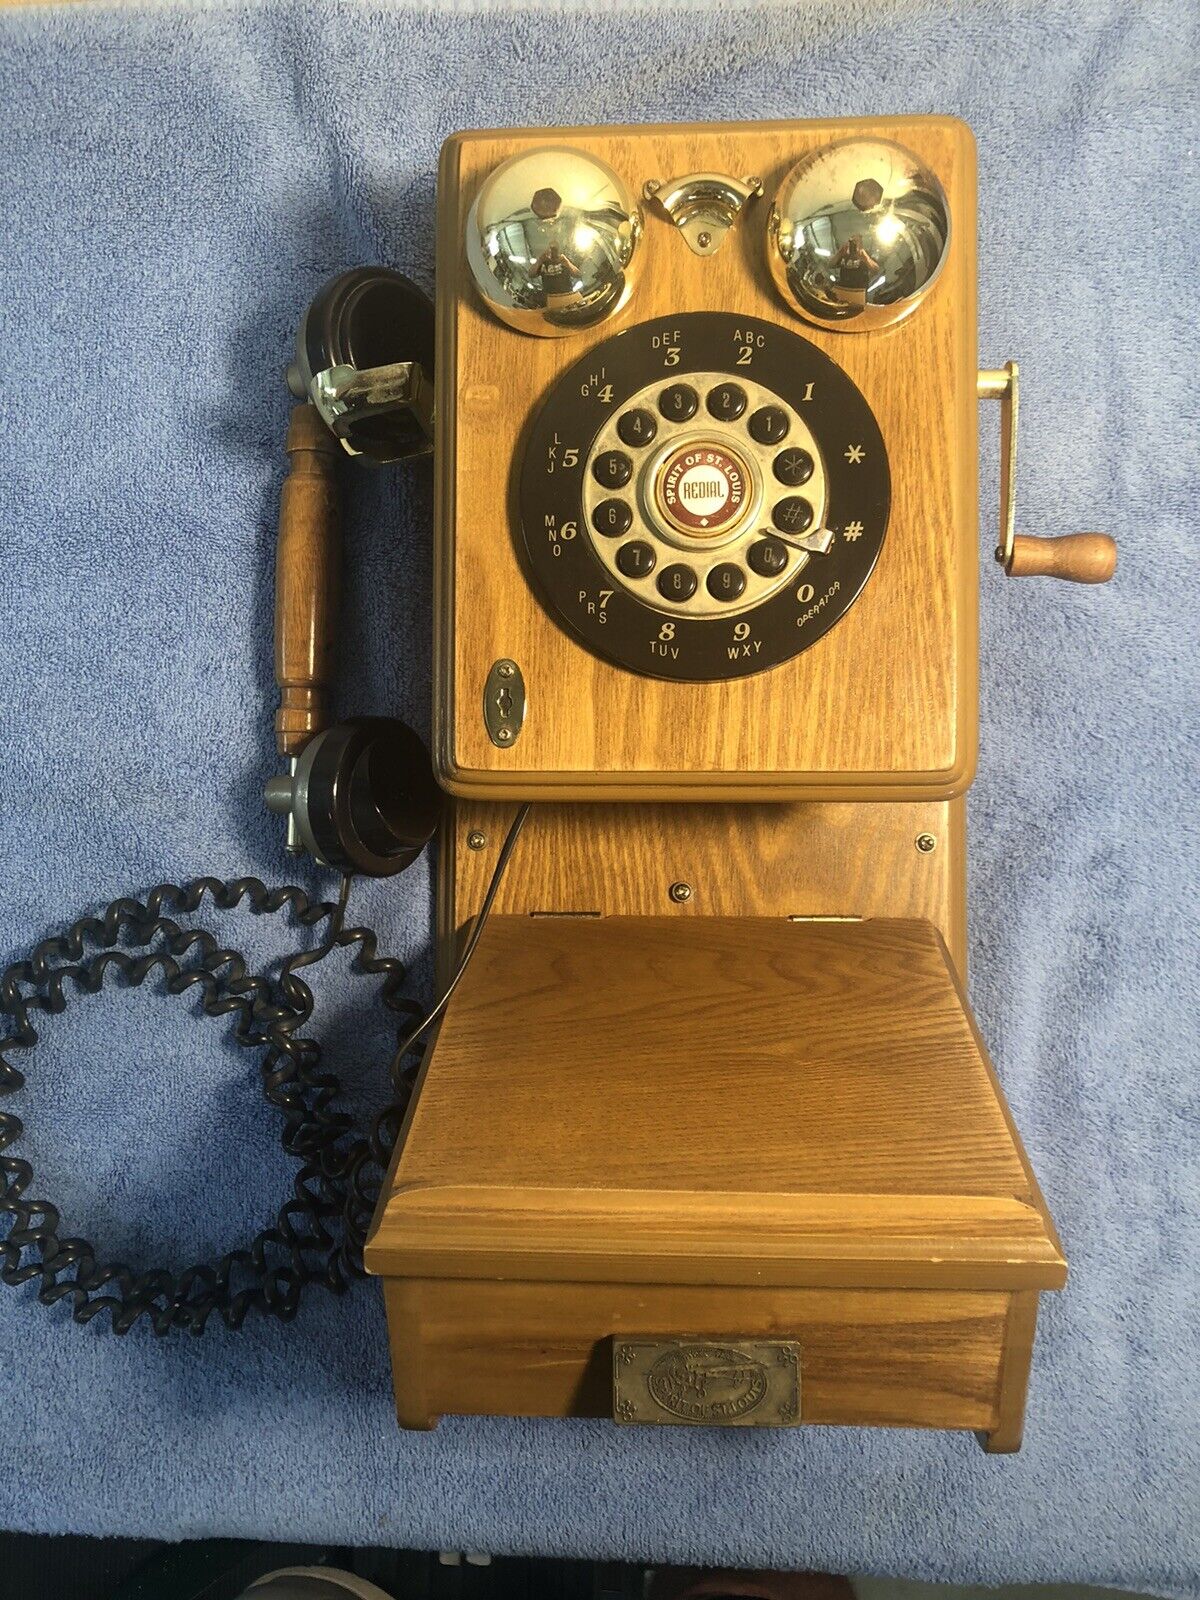 Vintage 1920’s Style Wall Phone